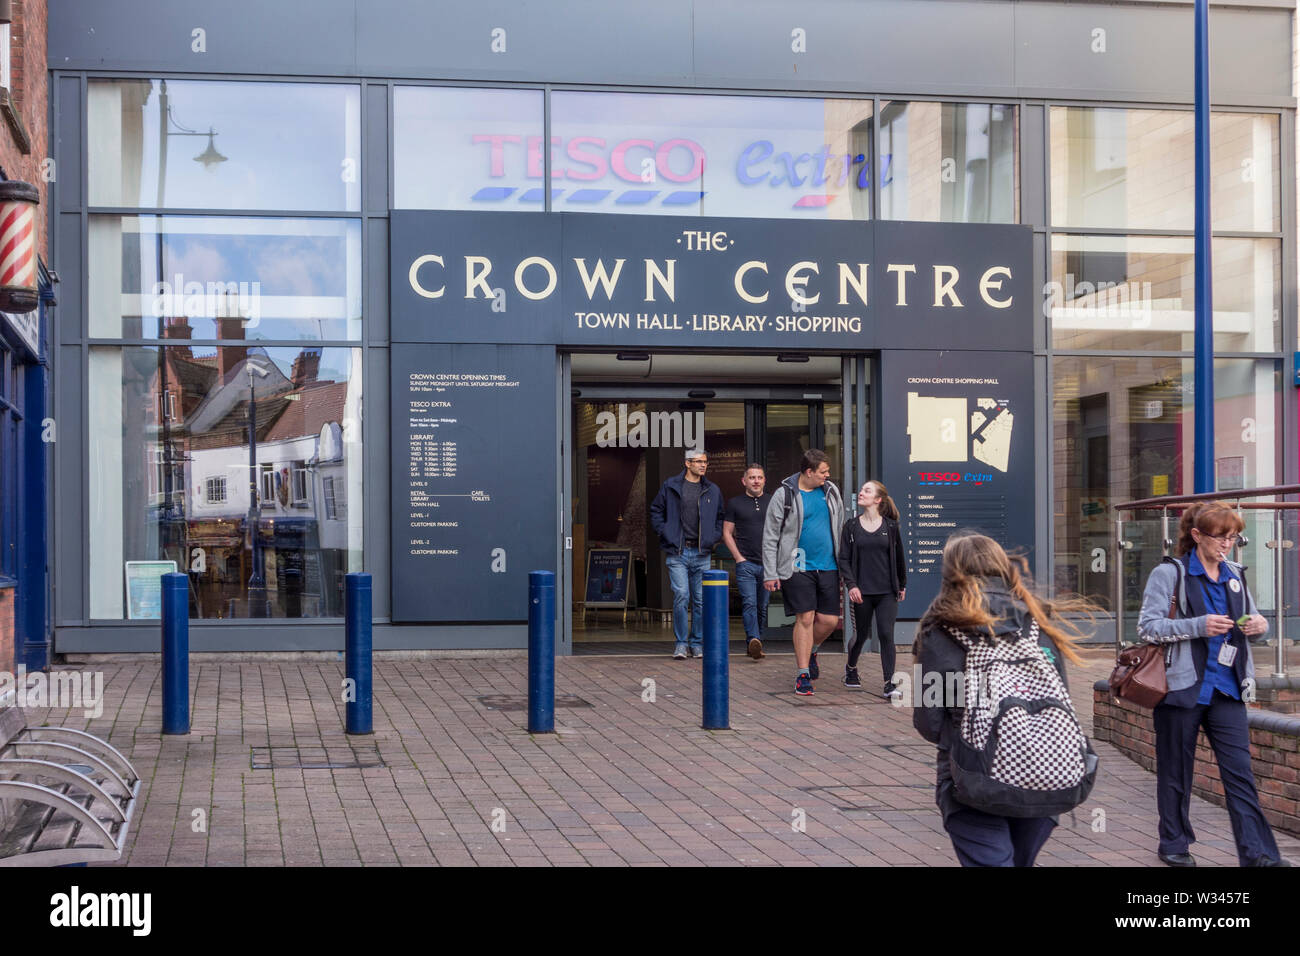 The Crown Centre in Stourbridge houses Town Hall, Library and retail shops, West Midlands, UK Stock Photo